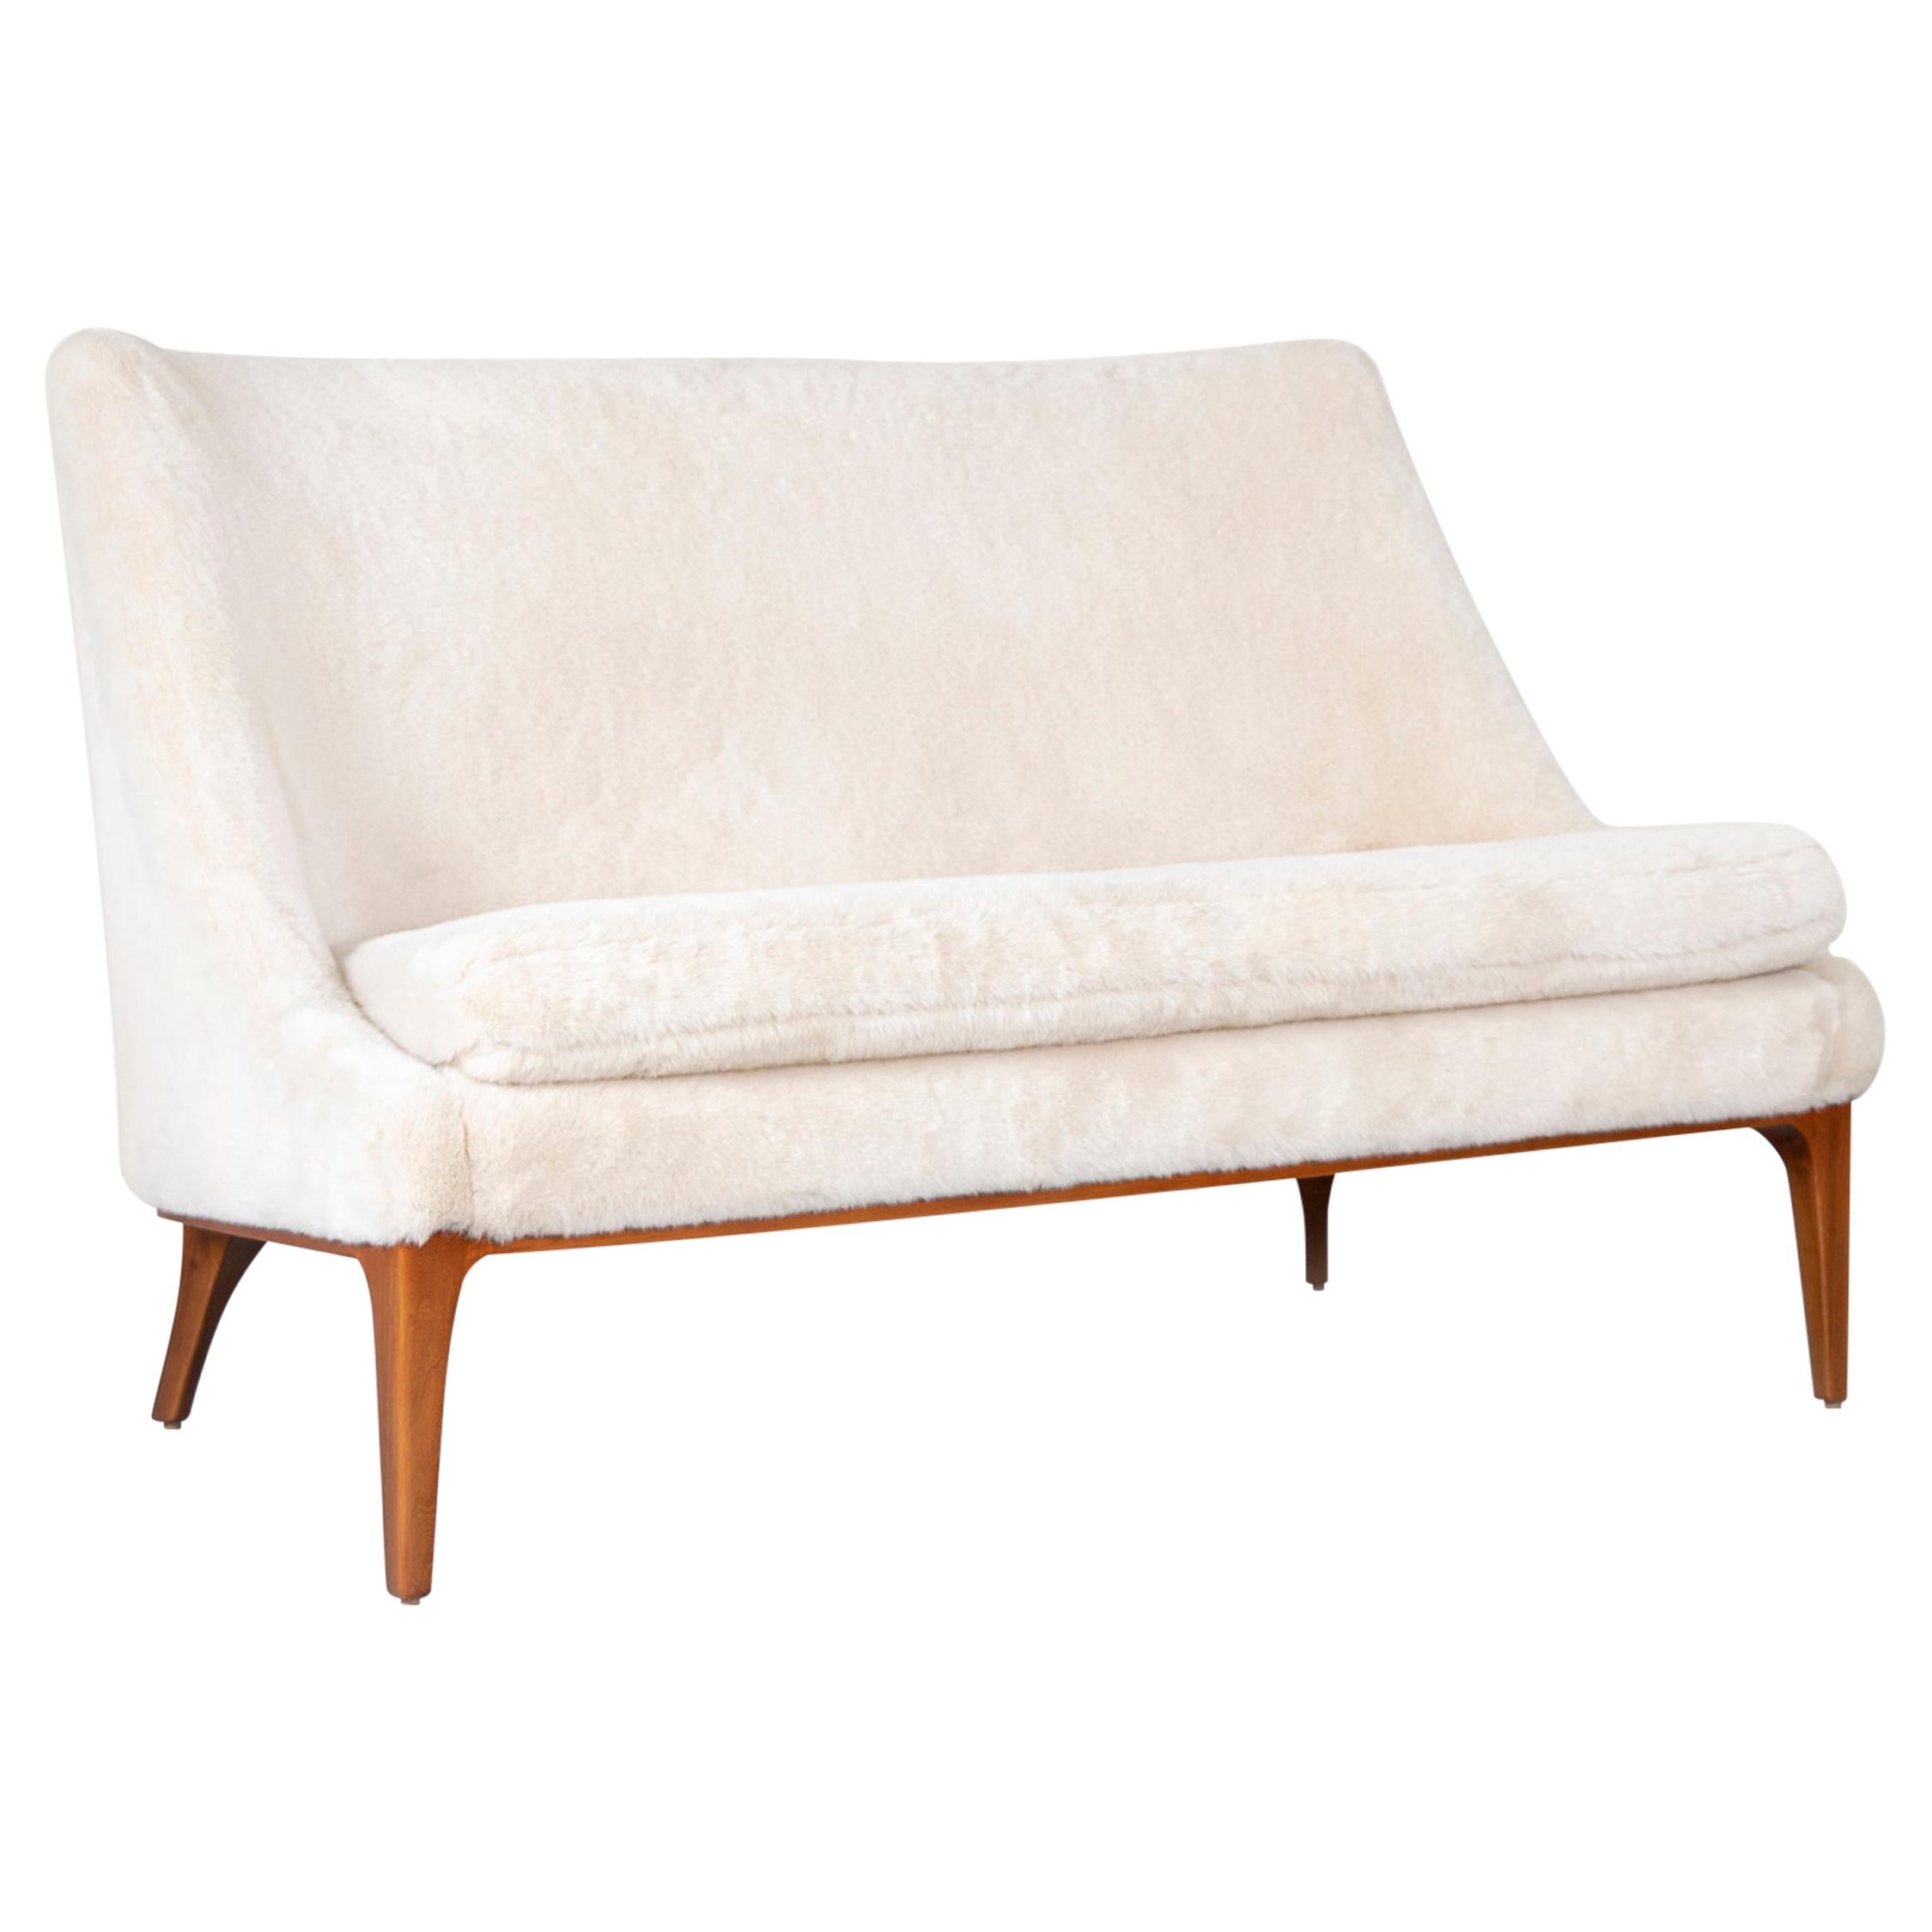 Lawrence Peabody Settee Reupholstered in Faux Fur For Sale